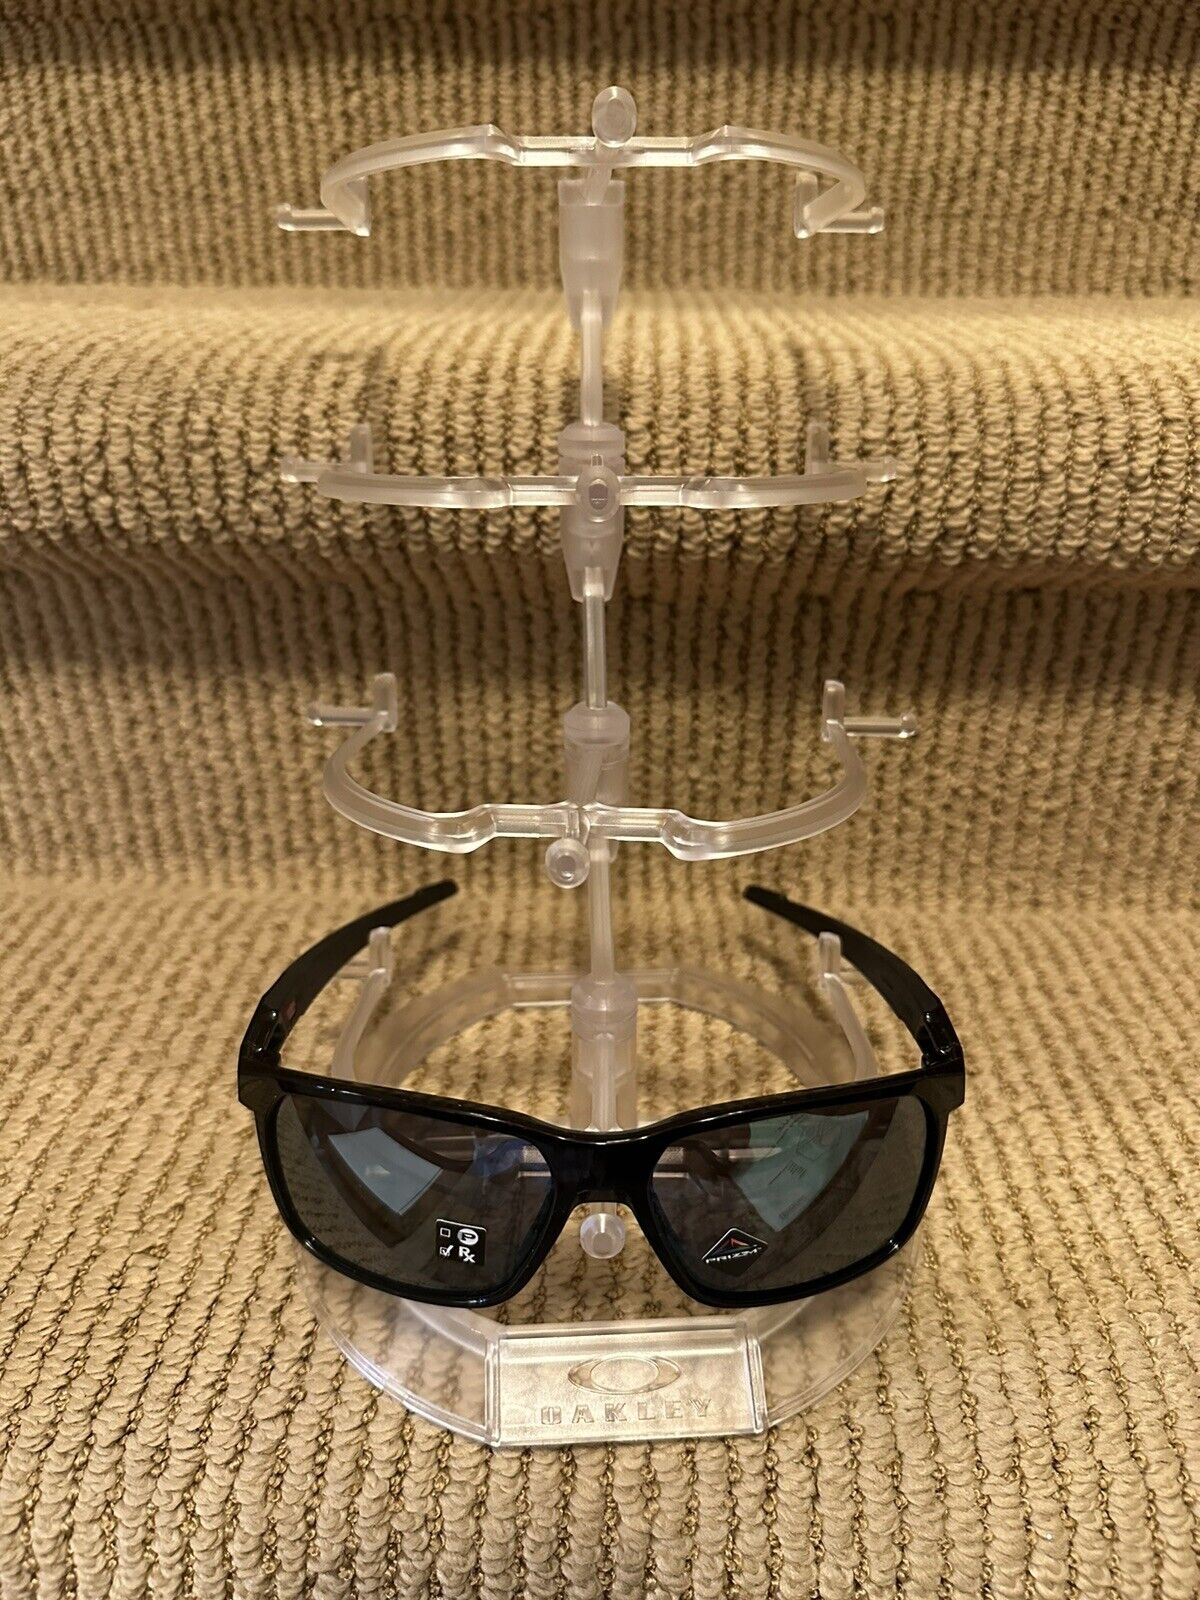 Authentic OAKLEY 4.0 CLEAR 4 TIER STORE DISPLAY STAND SUNGLASSES HOLDER NIB